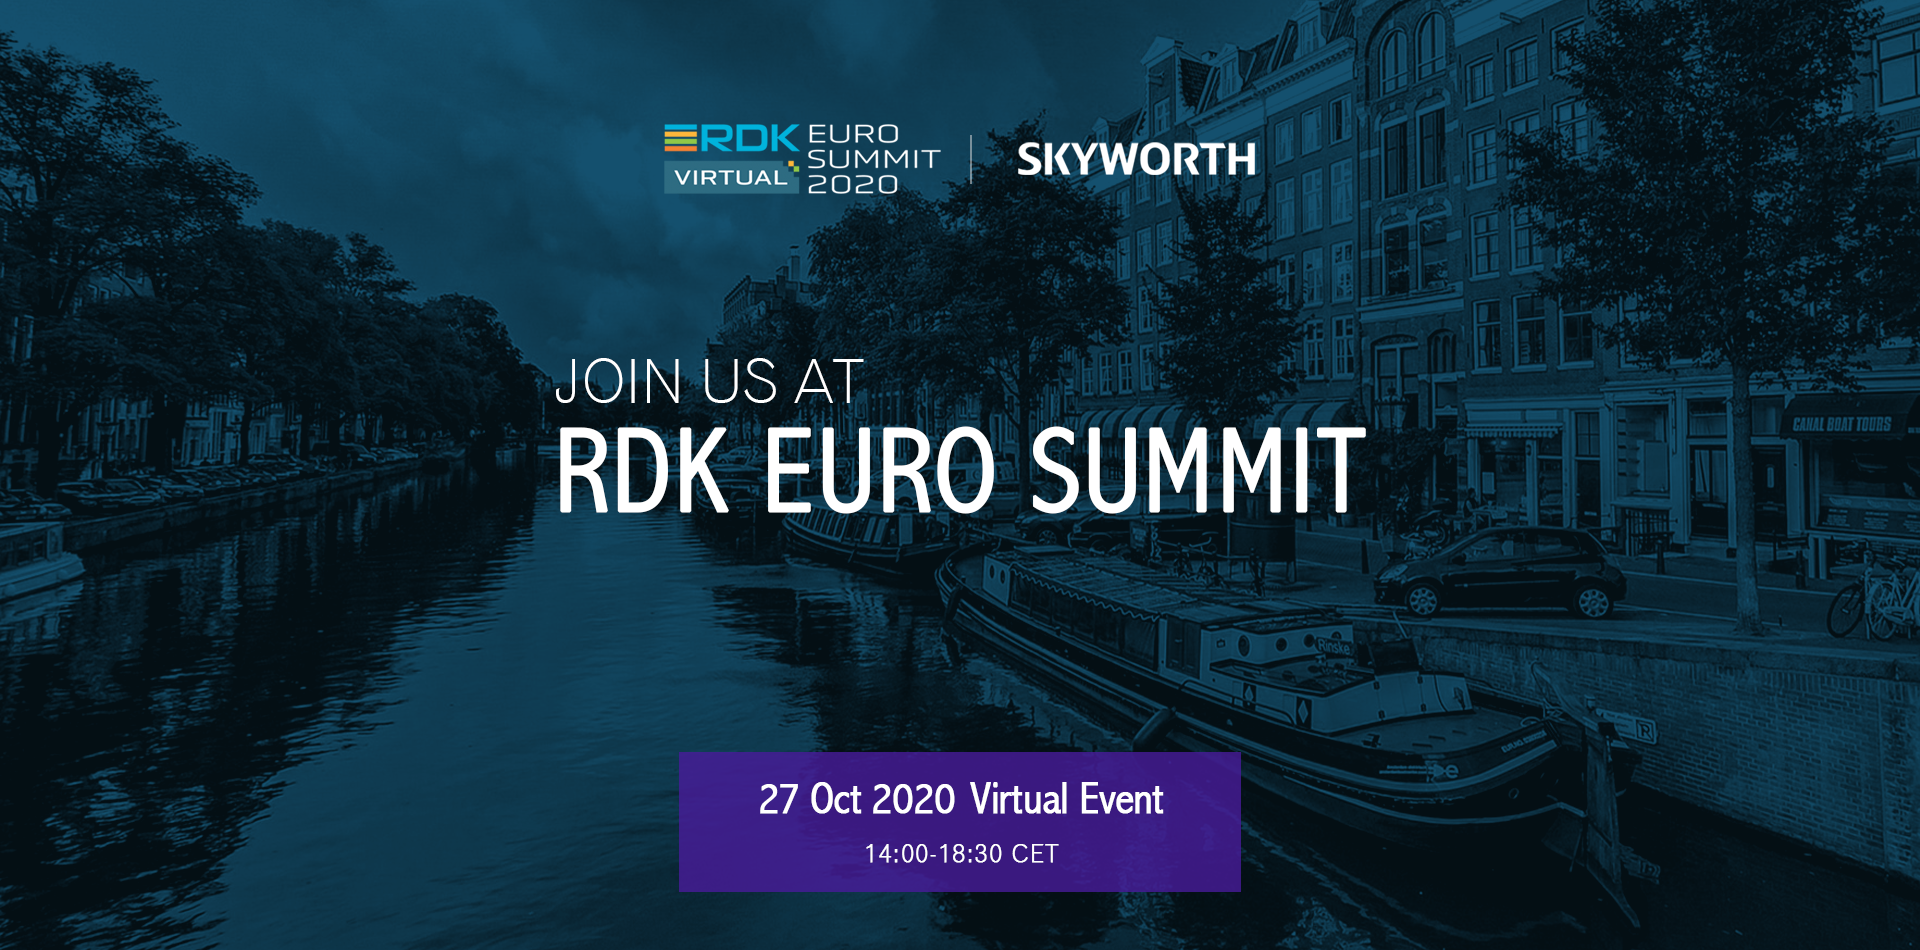 SKYWORTH Will Attend RDK Euro Summit 2020 and brings the world's first RDK Video Accelerator Based on Amlogic